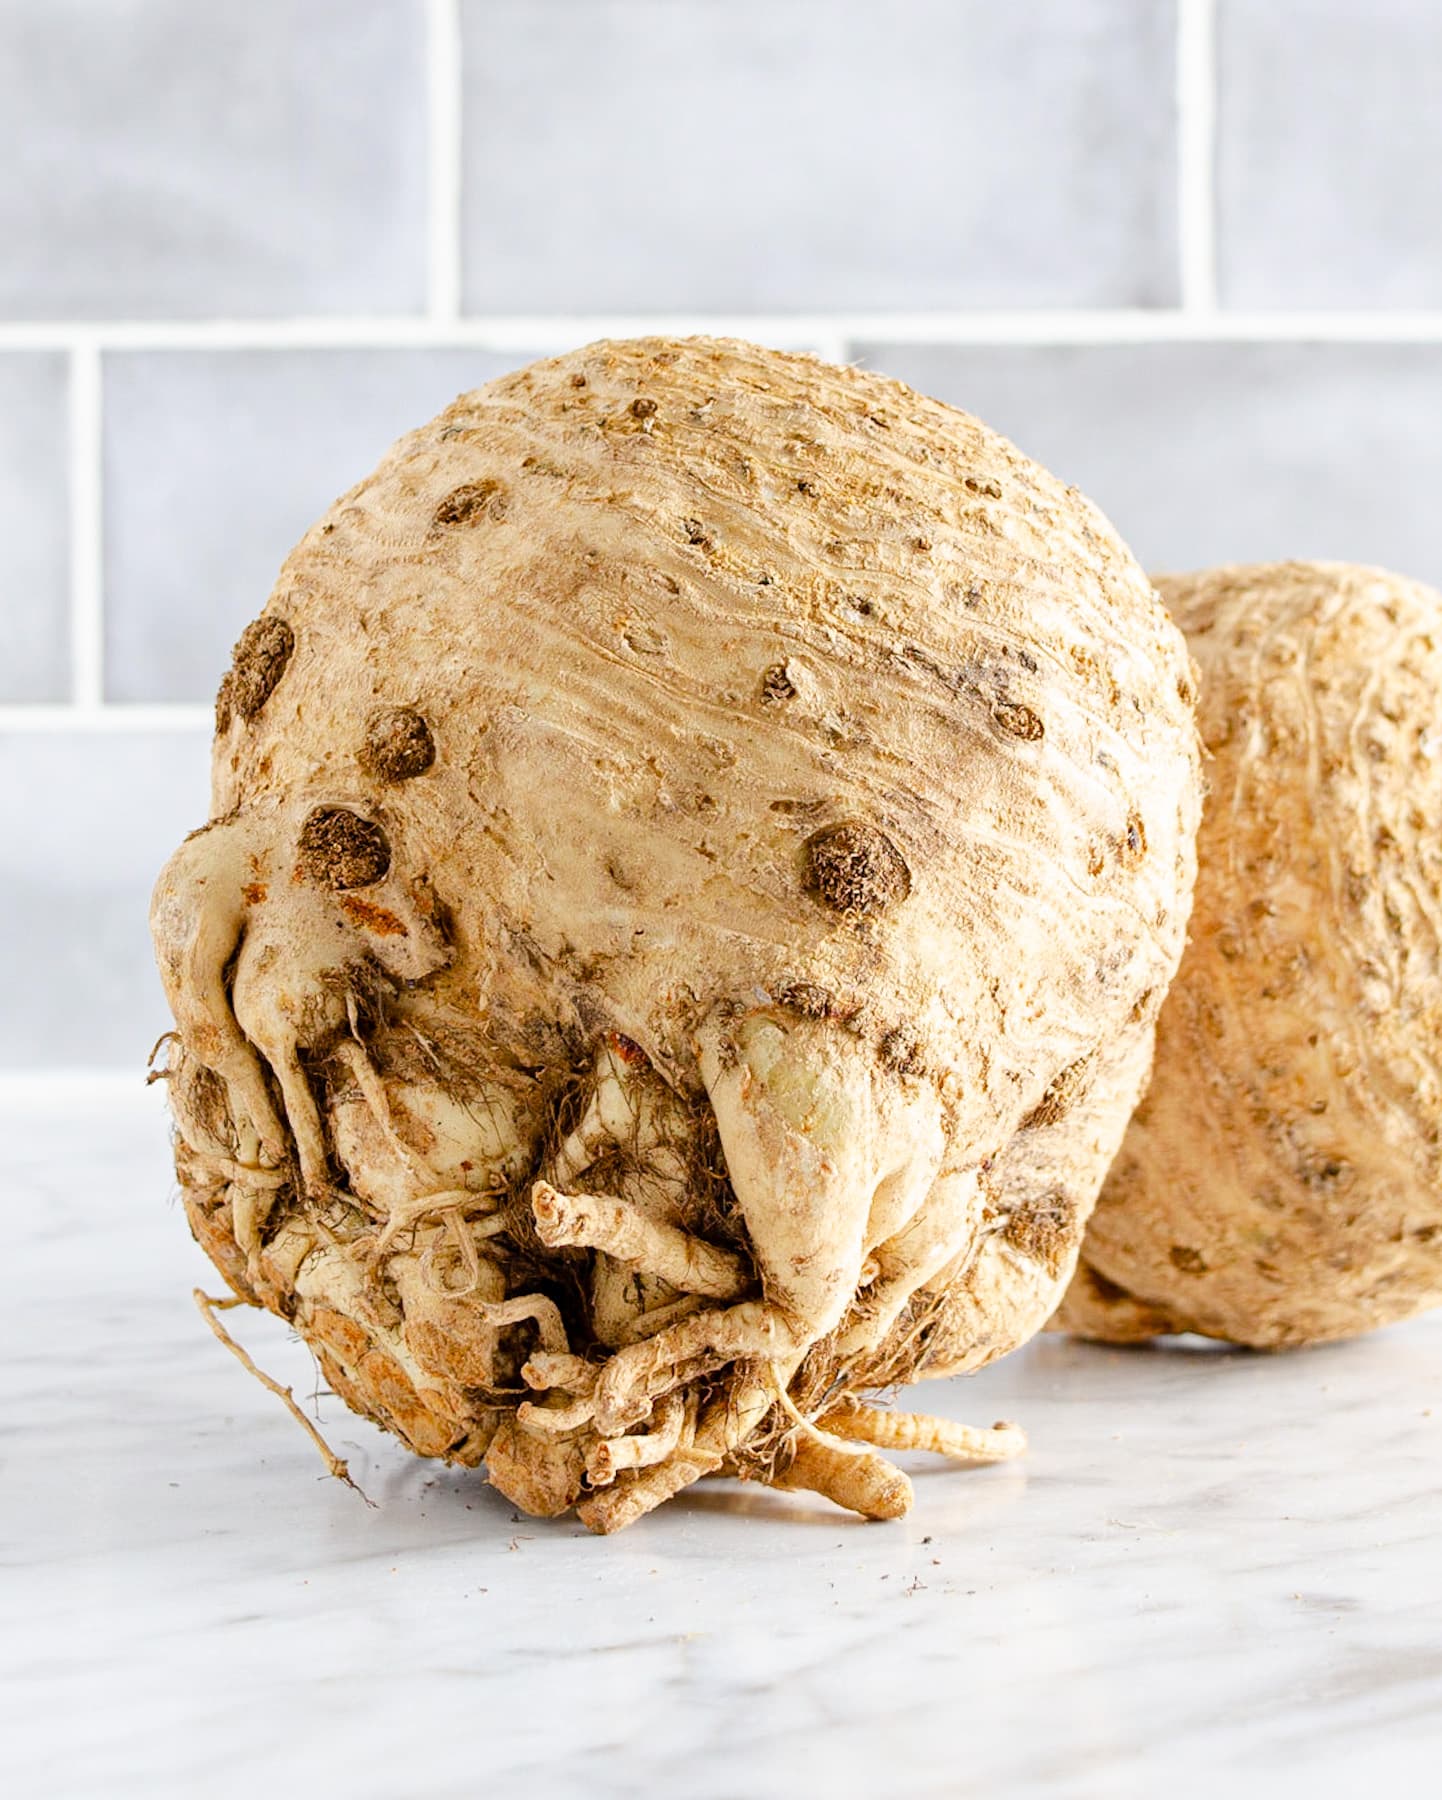 A whole unpeeled celeriac (celery root) on a white marble surface.